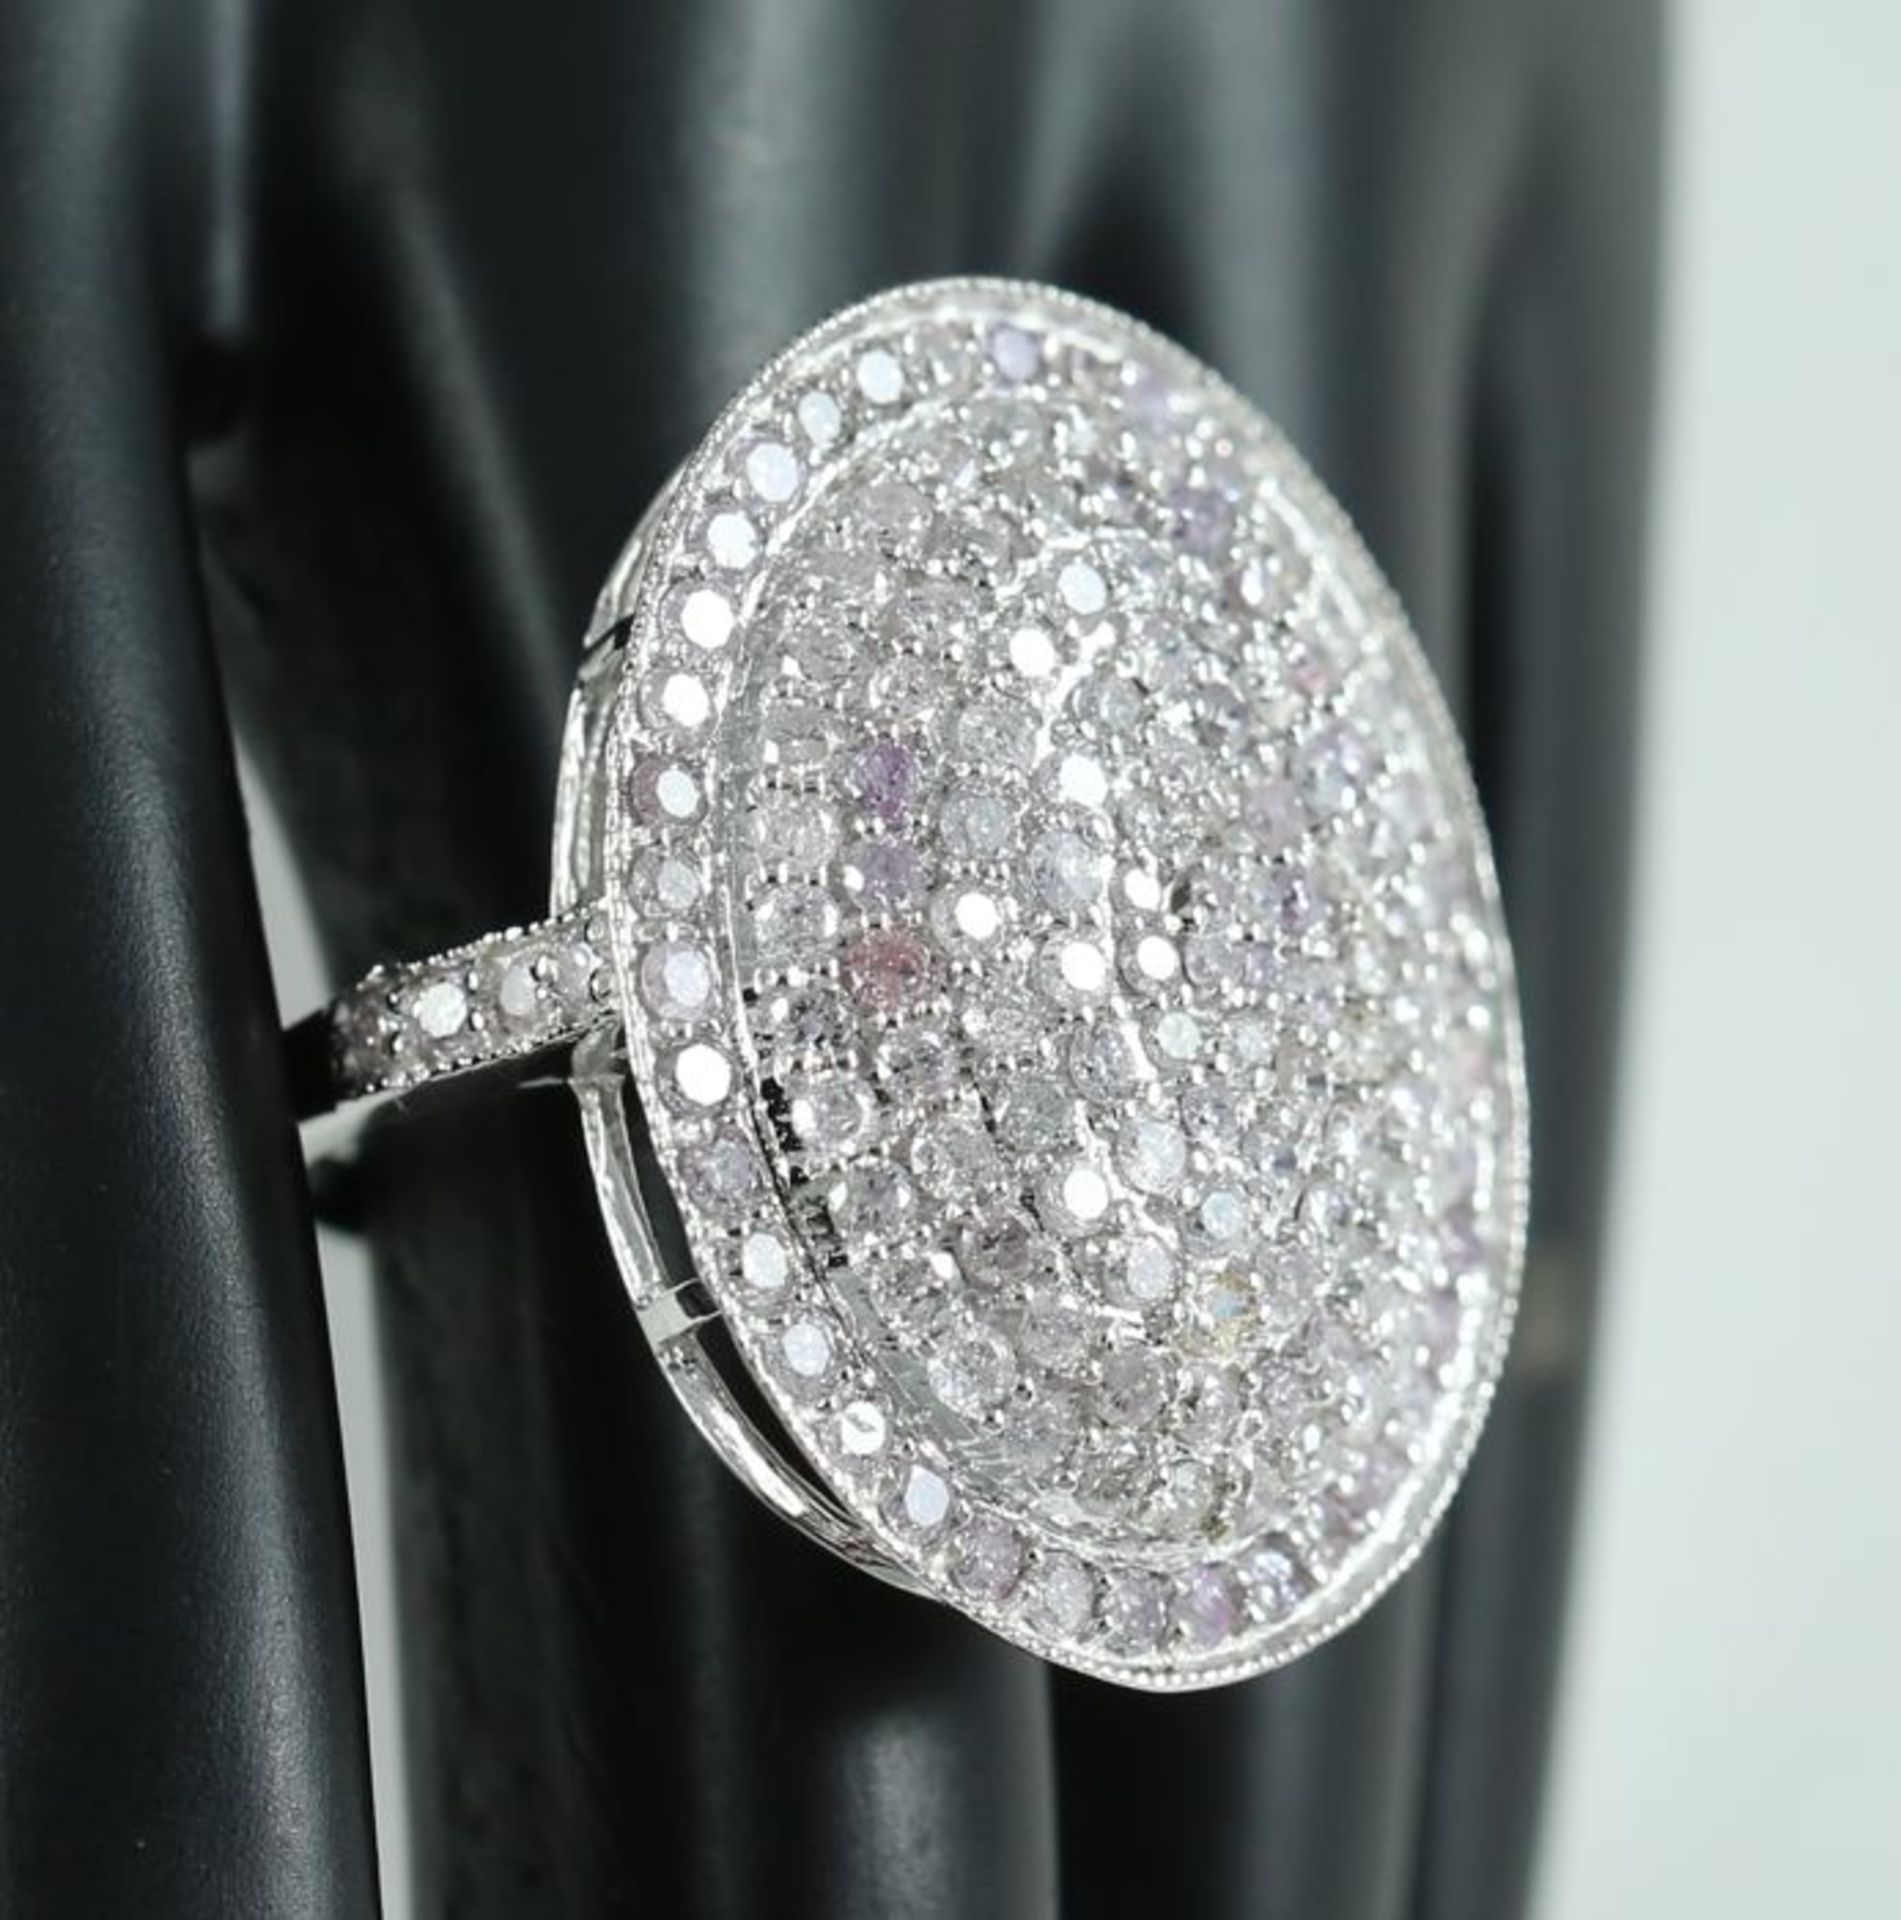 14 K / 585 White Gold Very Exclusive Pink Diamond Ring - Image 7 of 9